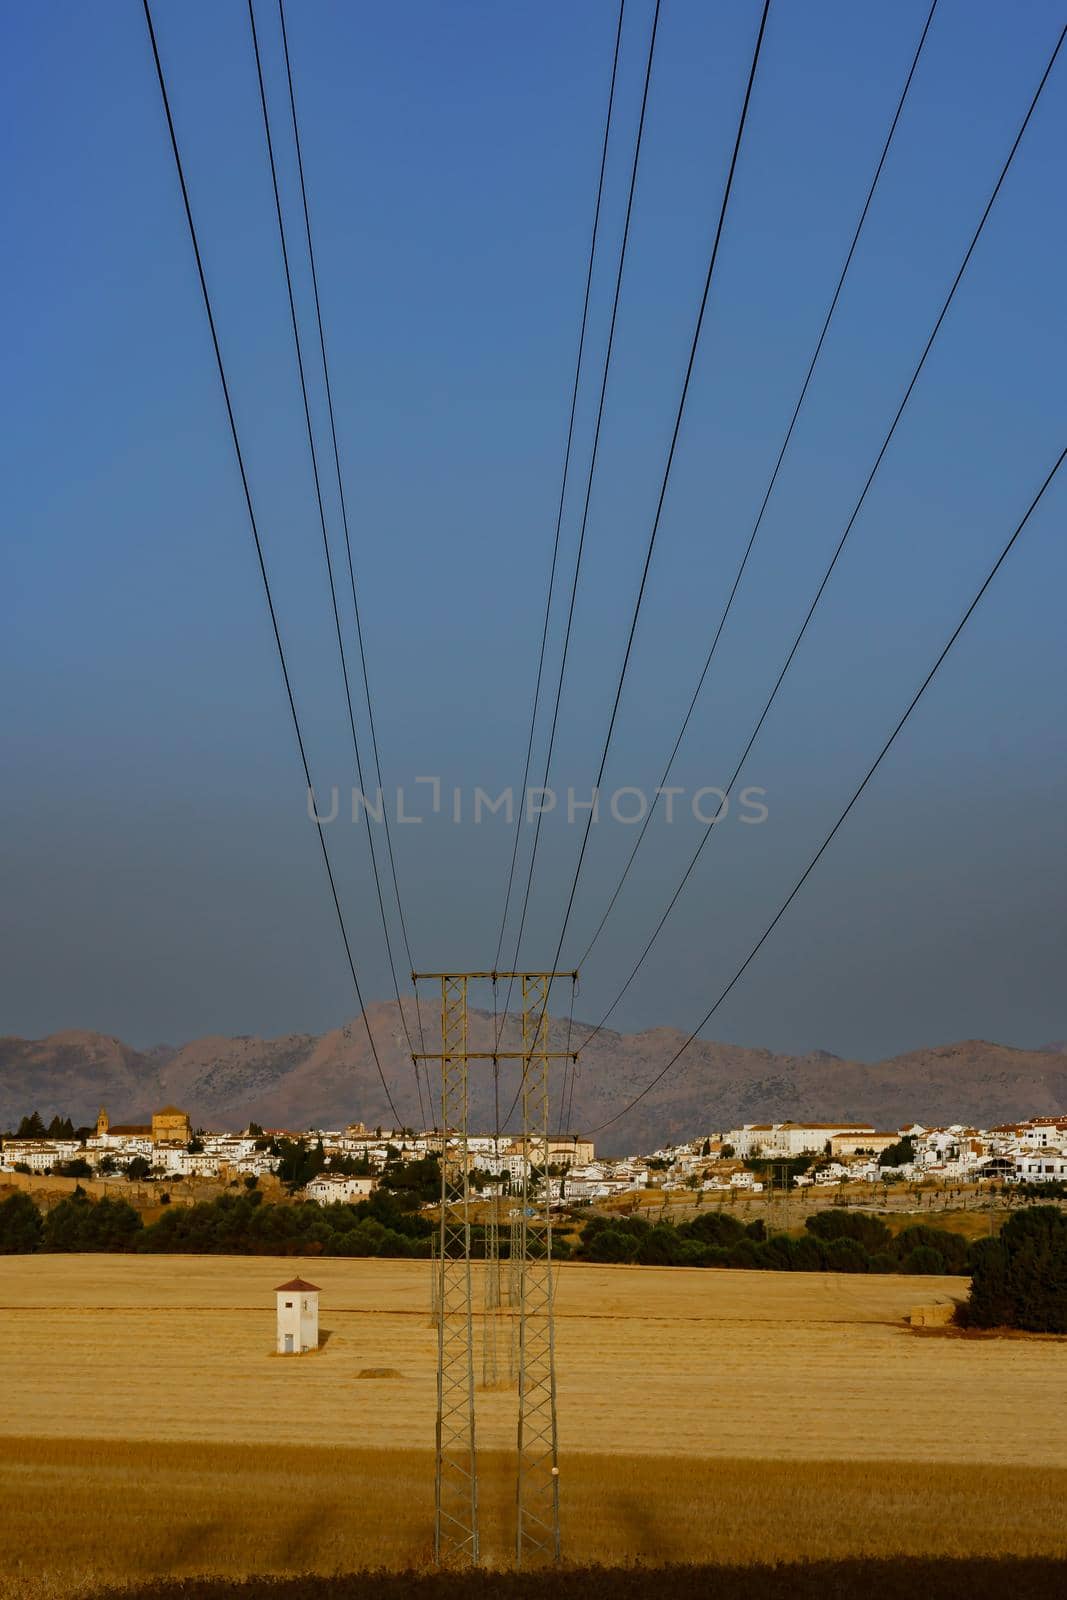 electric tower with cables, in the background a white village with cereal fields.